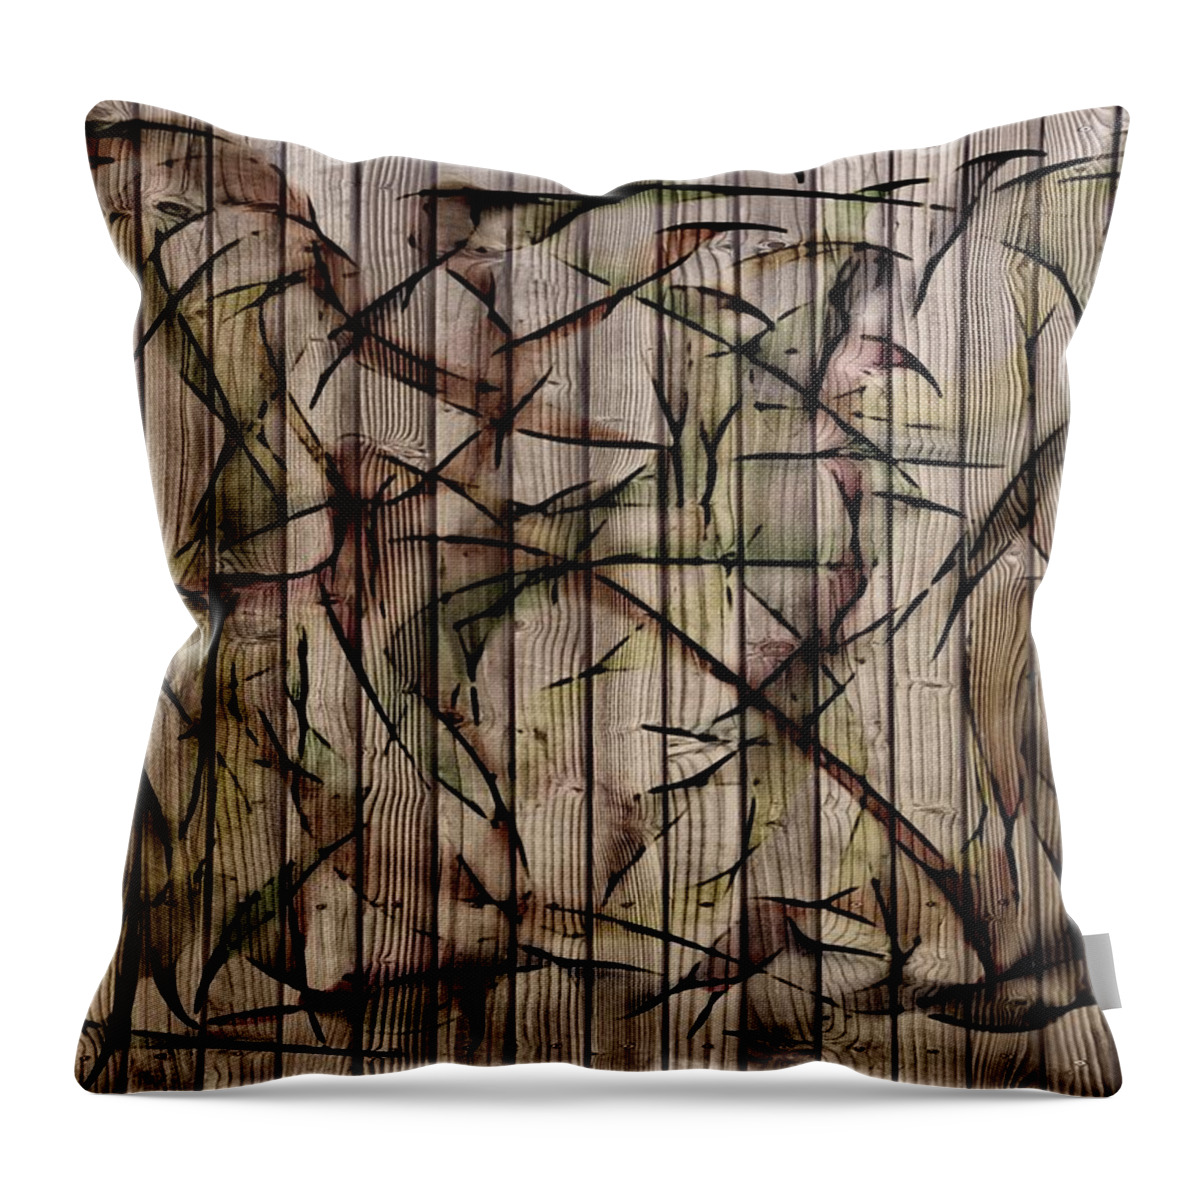 The Birds Abstract Throw Pillow featuring the painting The Birds Abstract by Marian Lonzetta